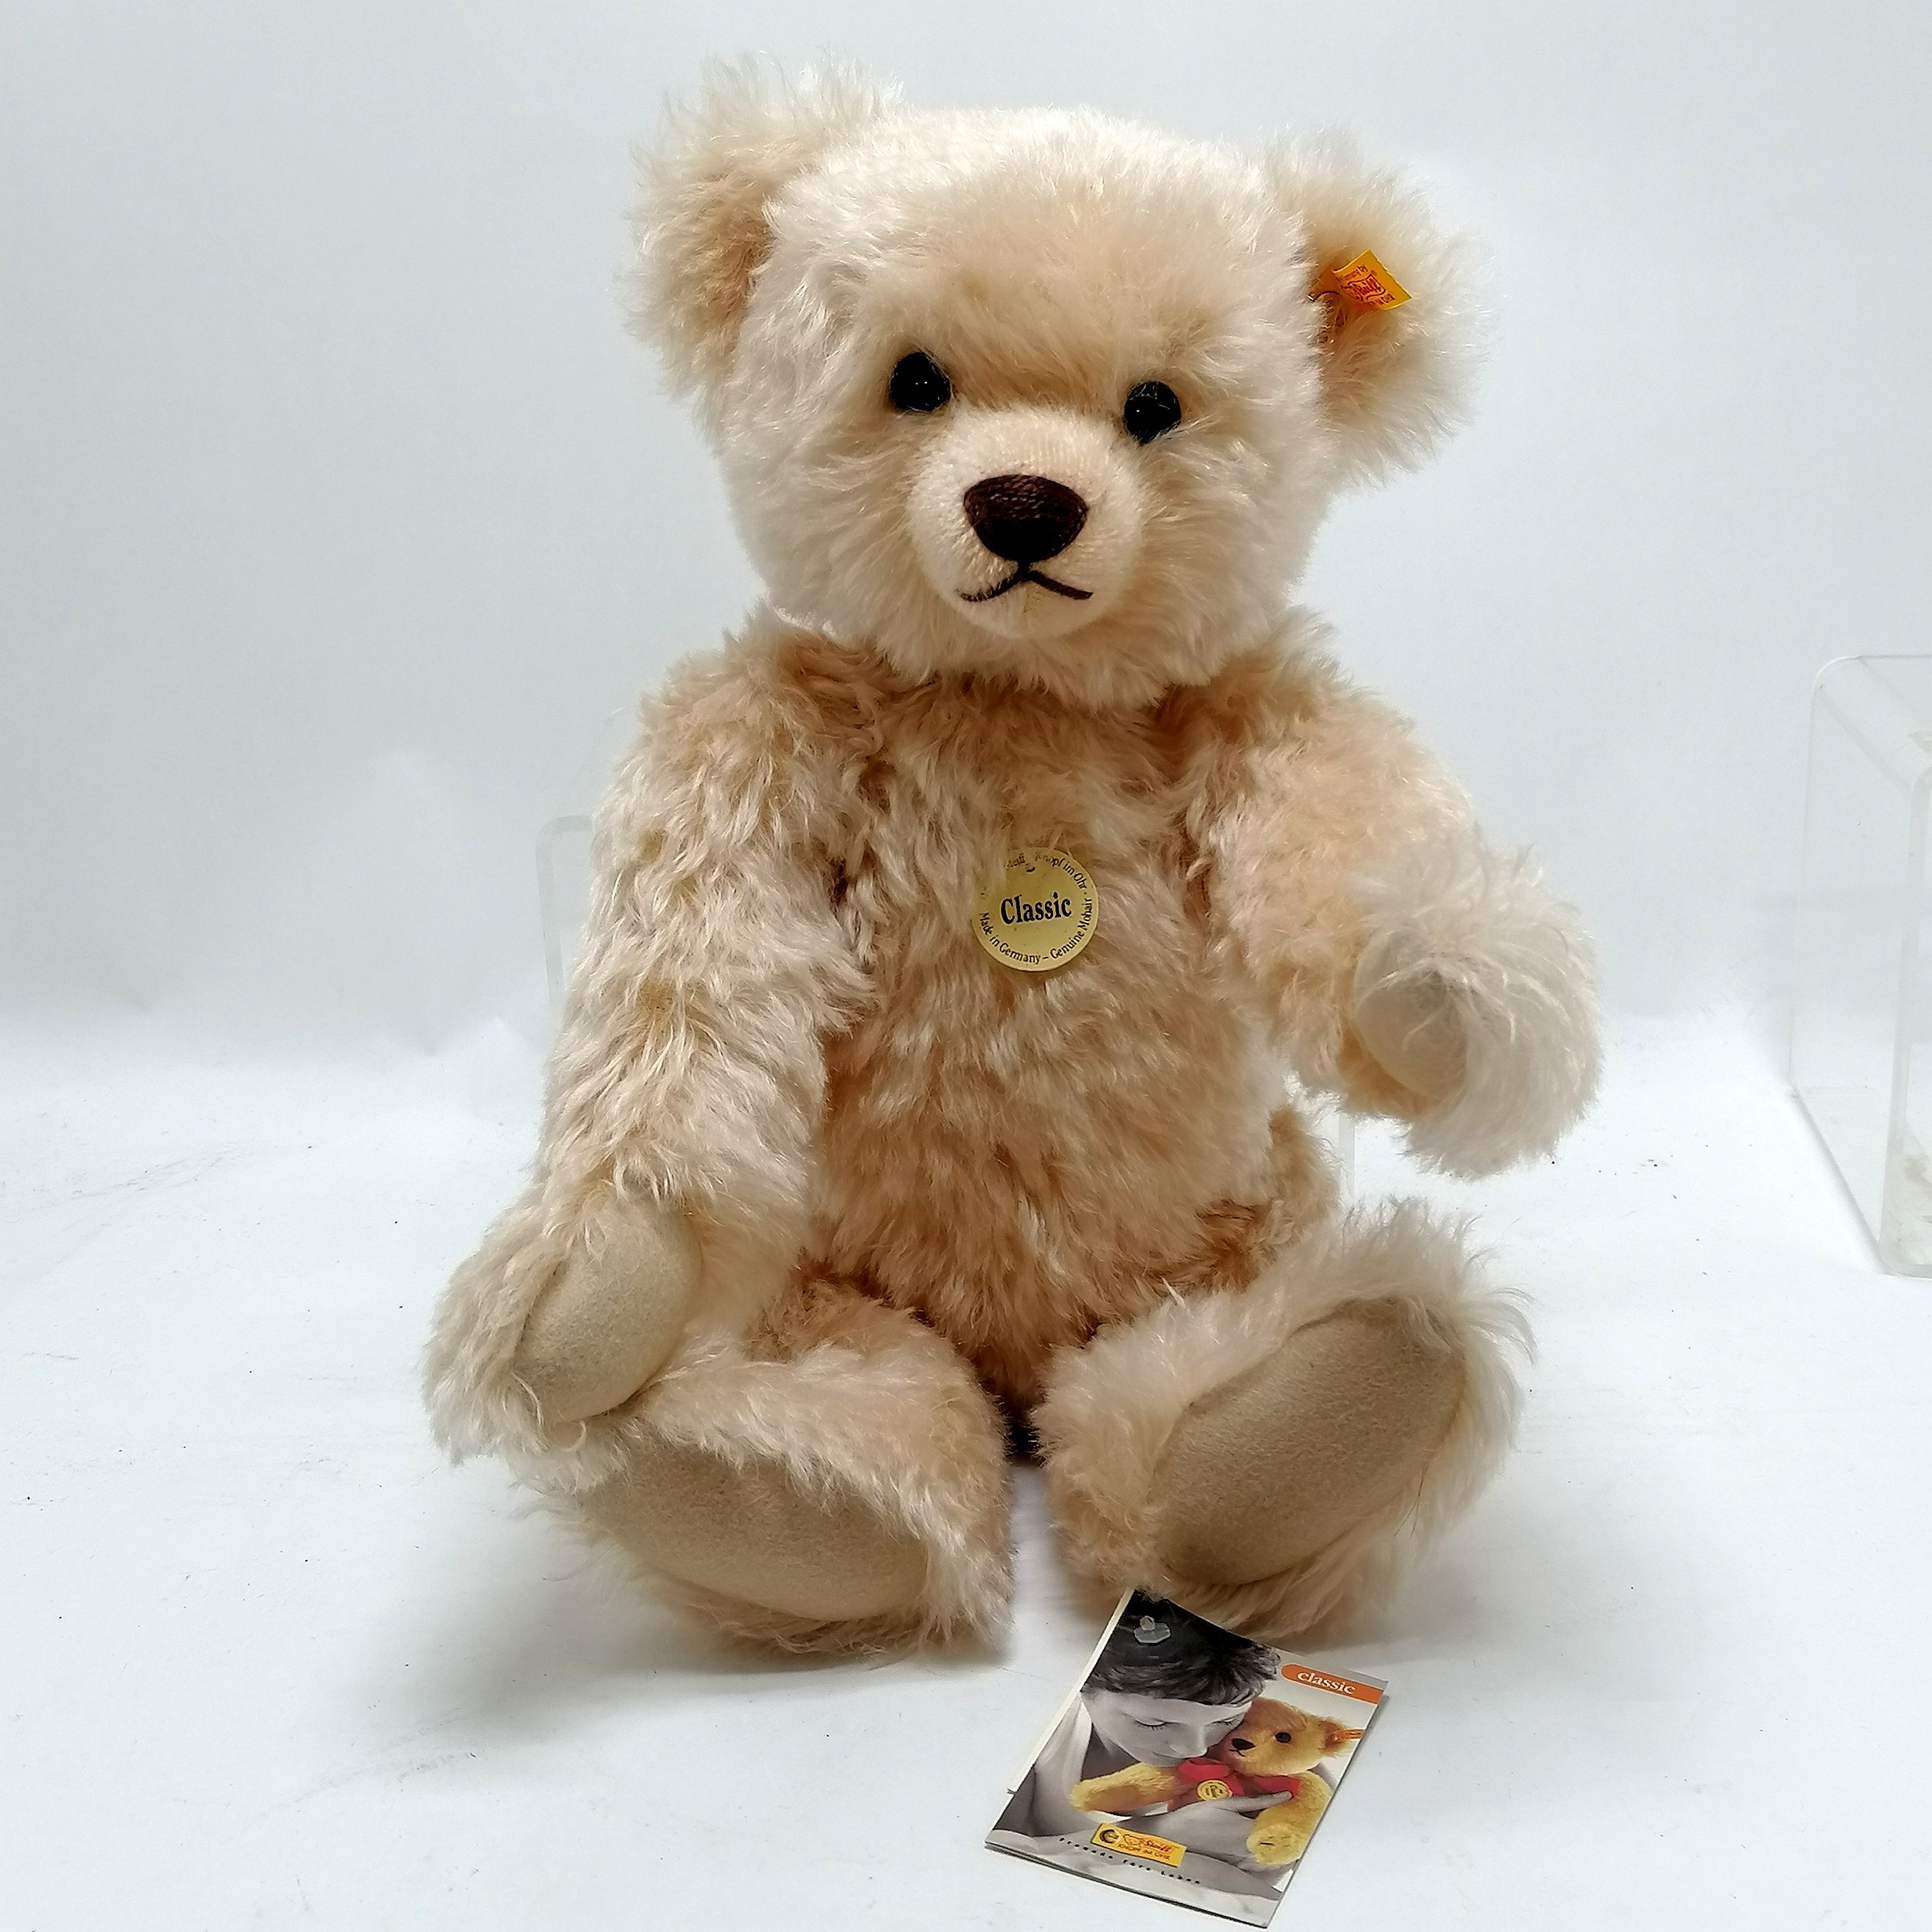 Steiff jointed mohair classic teddy with growl has swing tags 44cm high- In good used condition - Image 4 of 4